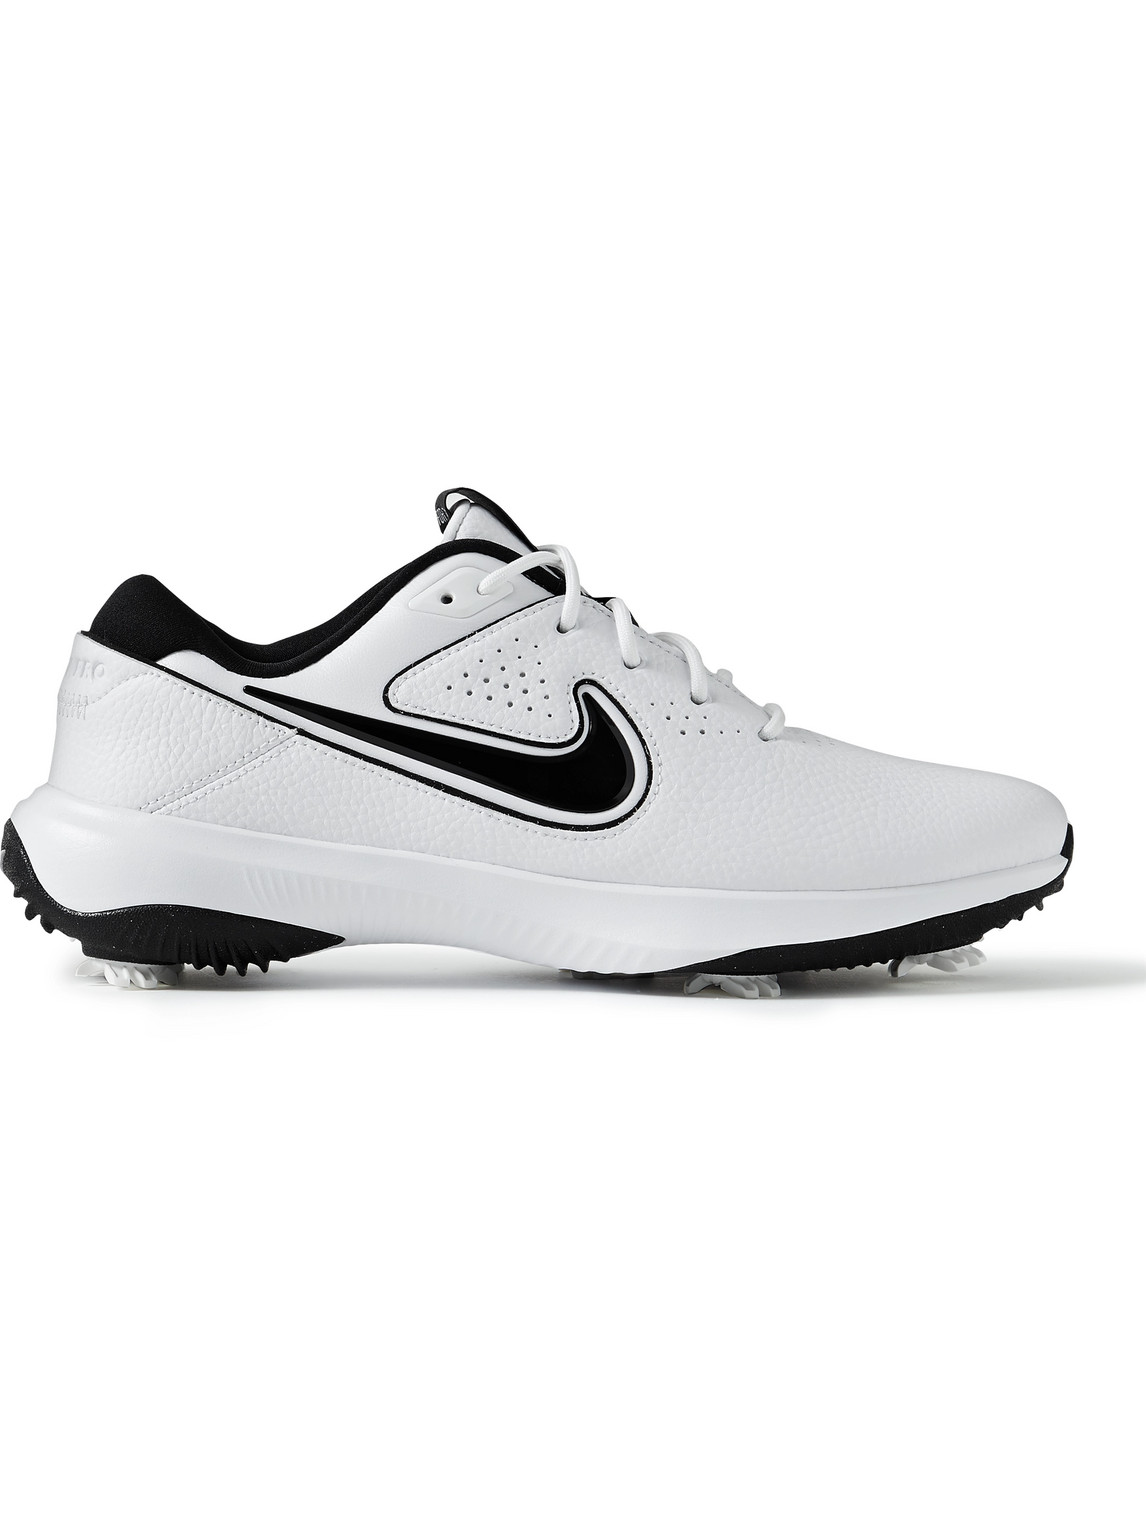 Victory Pro 3 Textured-Leather Golf Shoes